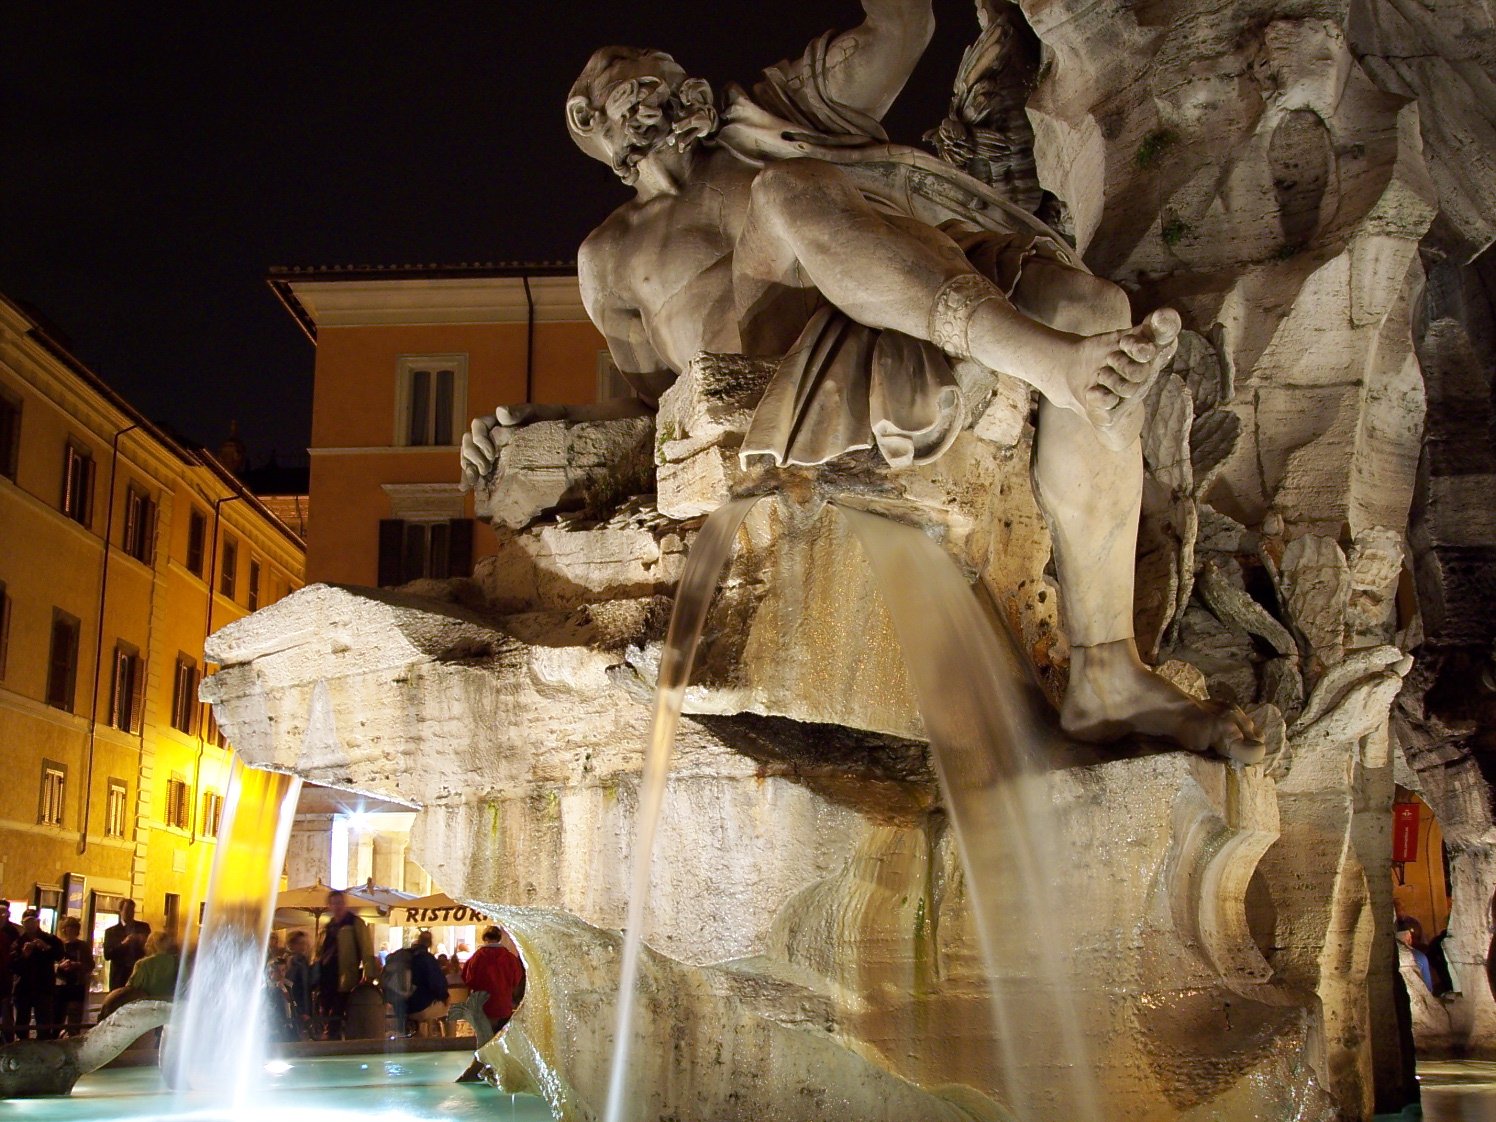 a fountain with a statue of a man holding a sword is surrounded by people standing in the background